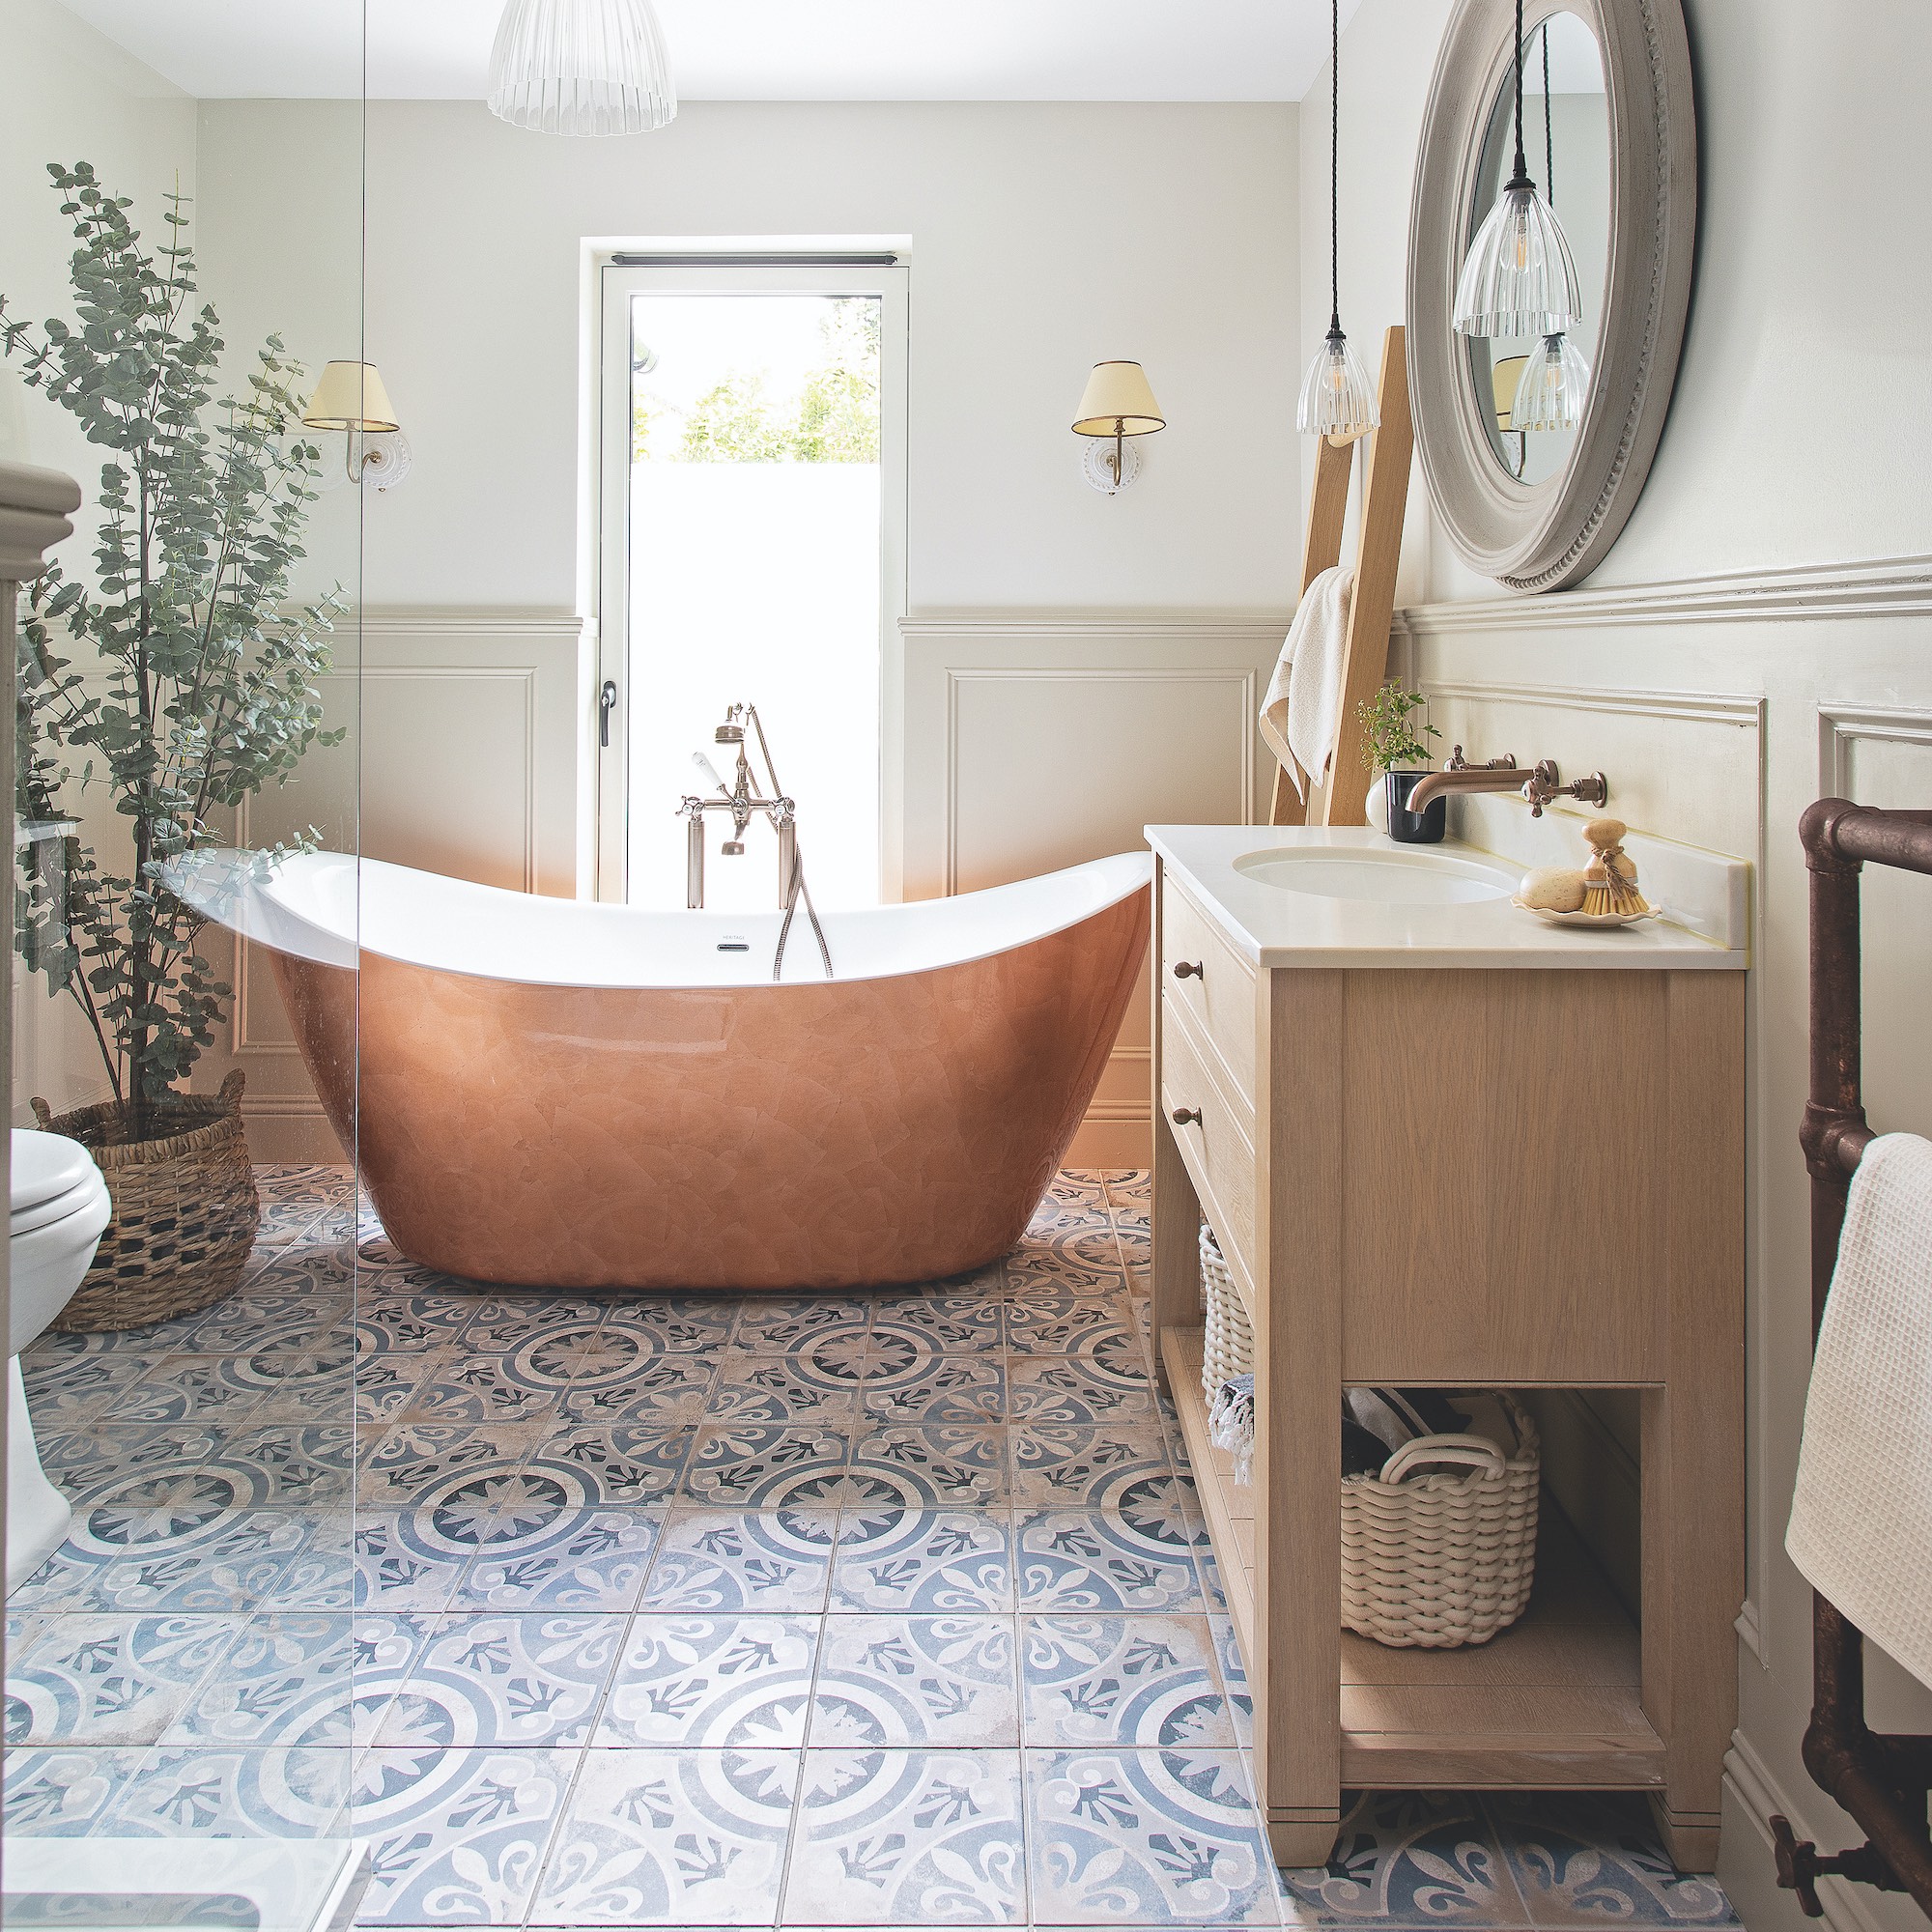 copper look bath with patterned floor tiles